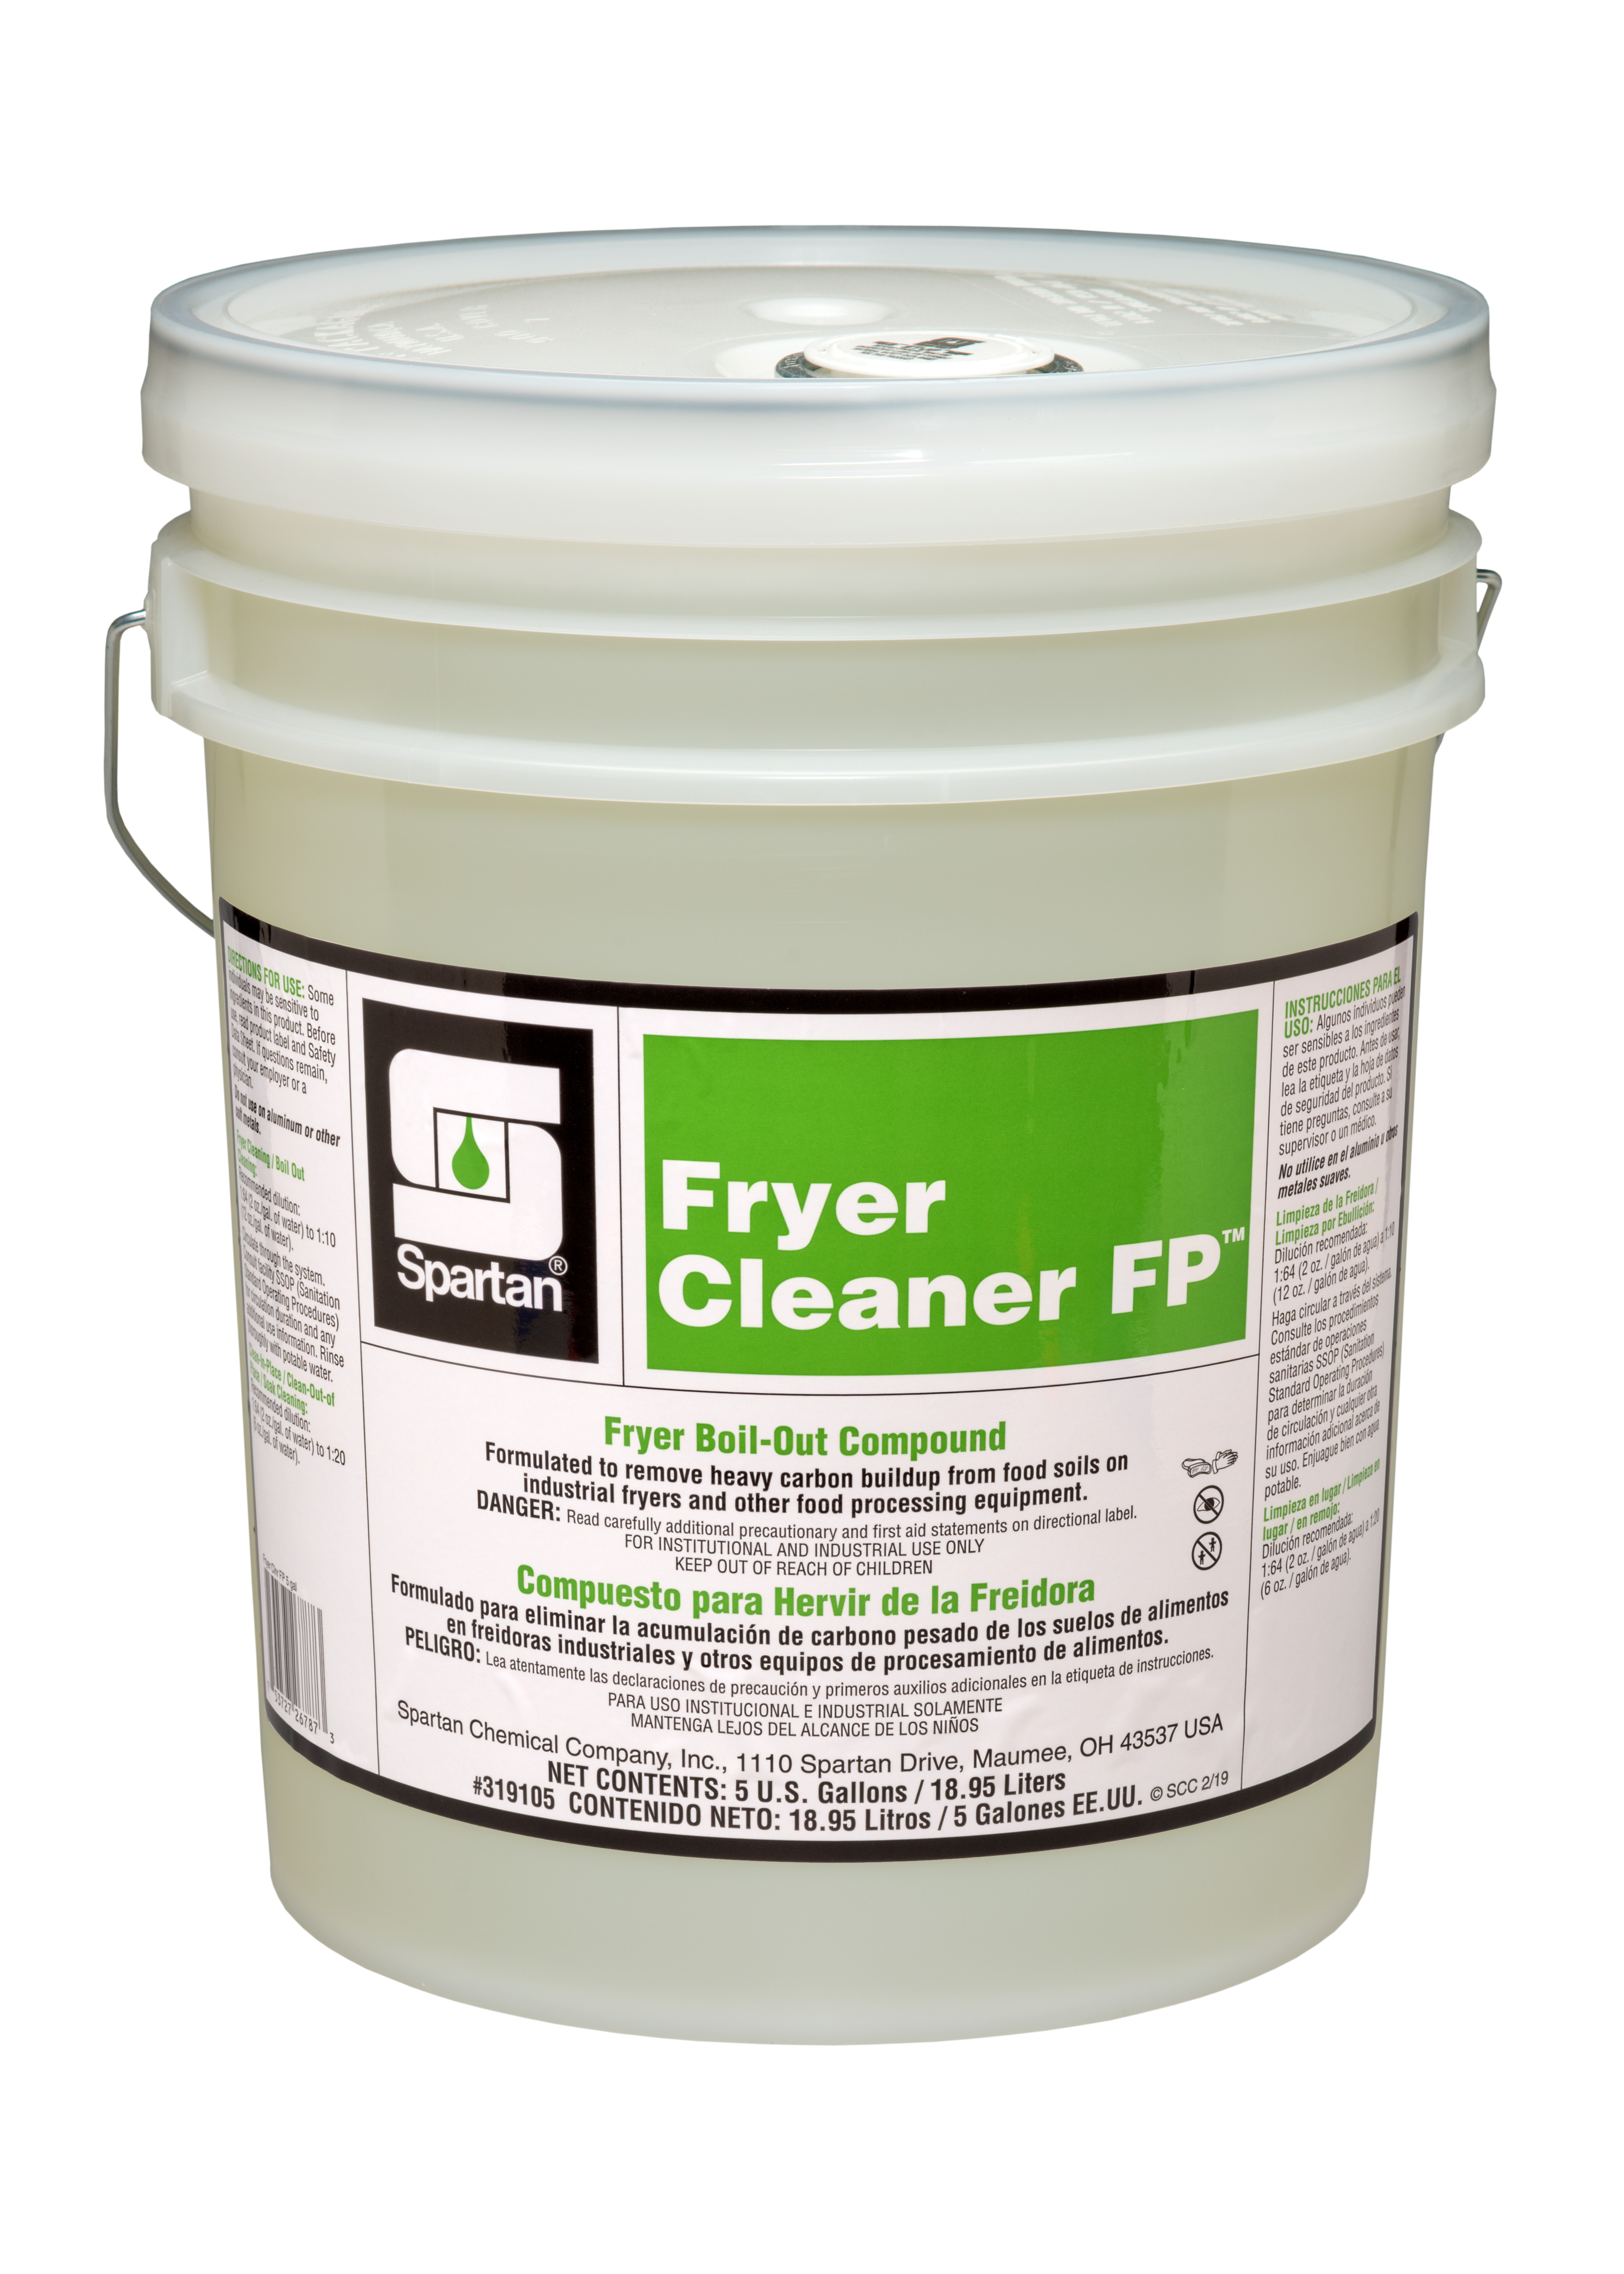 Spartan Chemical Company Fryer Cleaner FP, 5 GAL PAIL